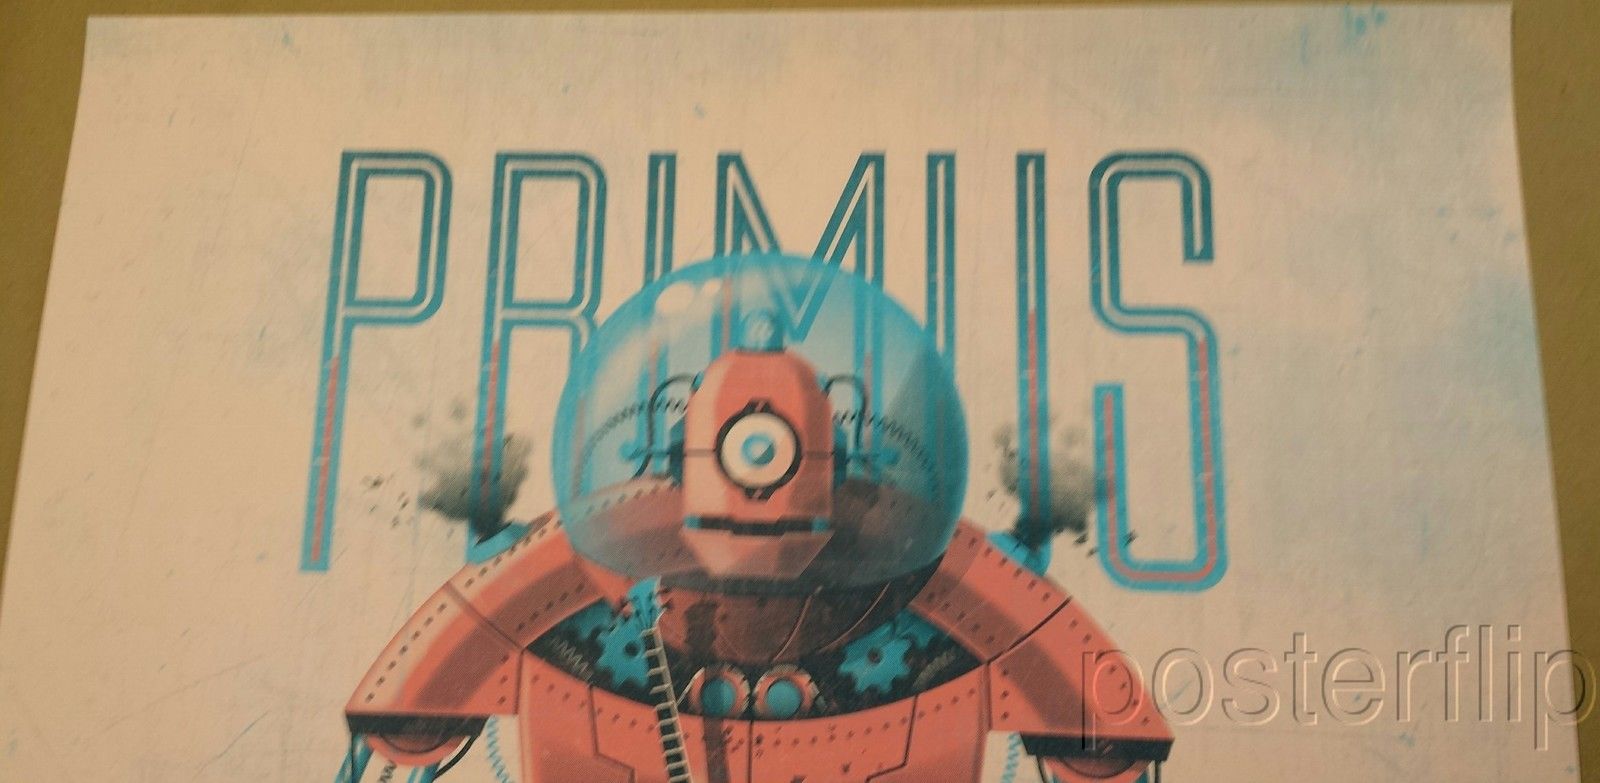 Title: Primus - Birmingham, AL 2014 (Variant)  Artist: DKNG  Edition:  xx/50  Type: Screen print poster  Size: 18" x 24"  Venue: Iron City  Location: Birmingham, AL  Notes:  Print is stored flat in very good condition.  Limited edition Screen Print Poster of 50, Signed and Numbered by artist.